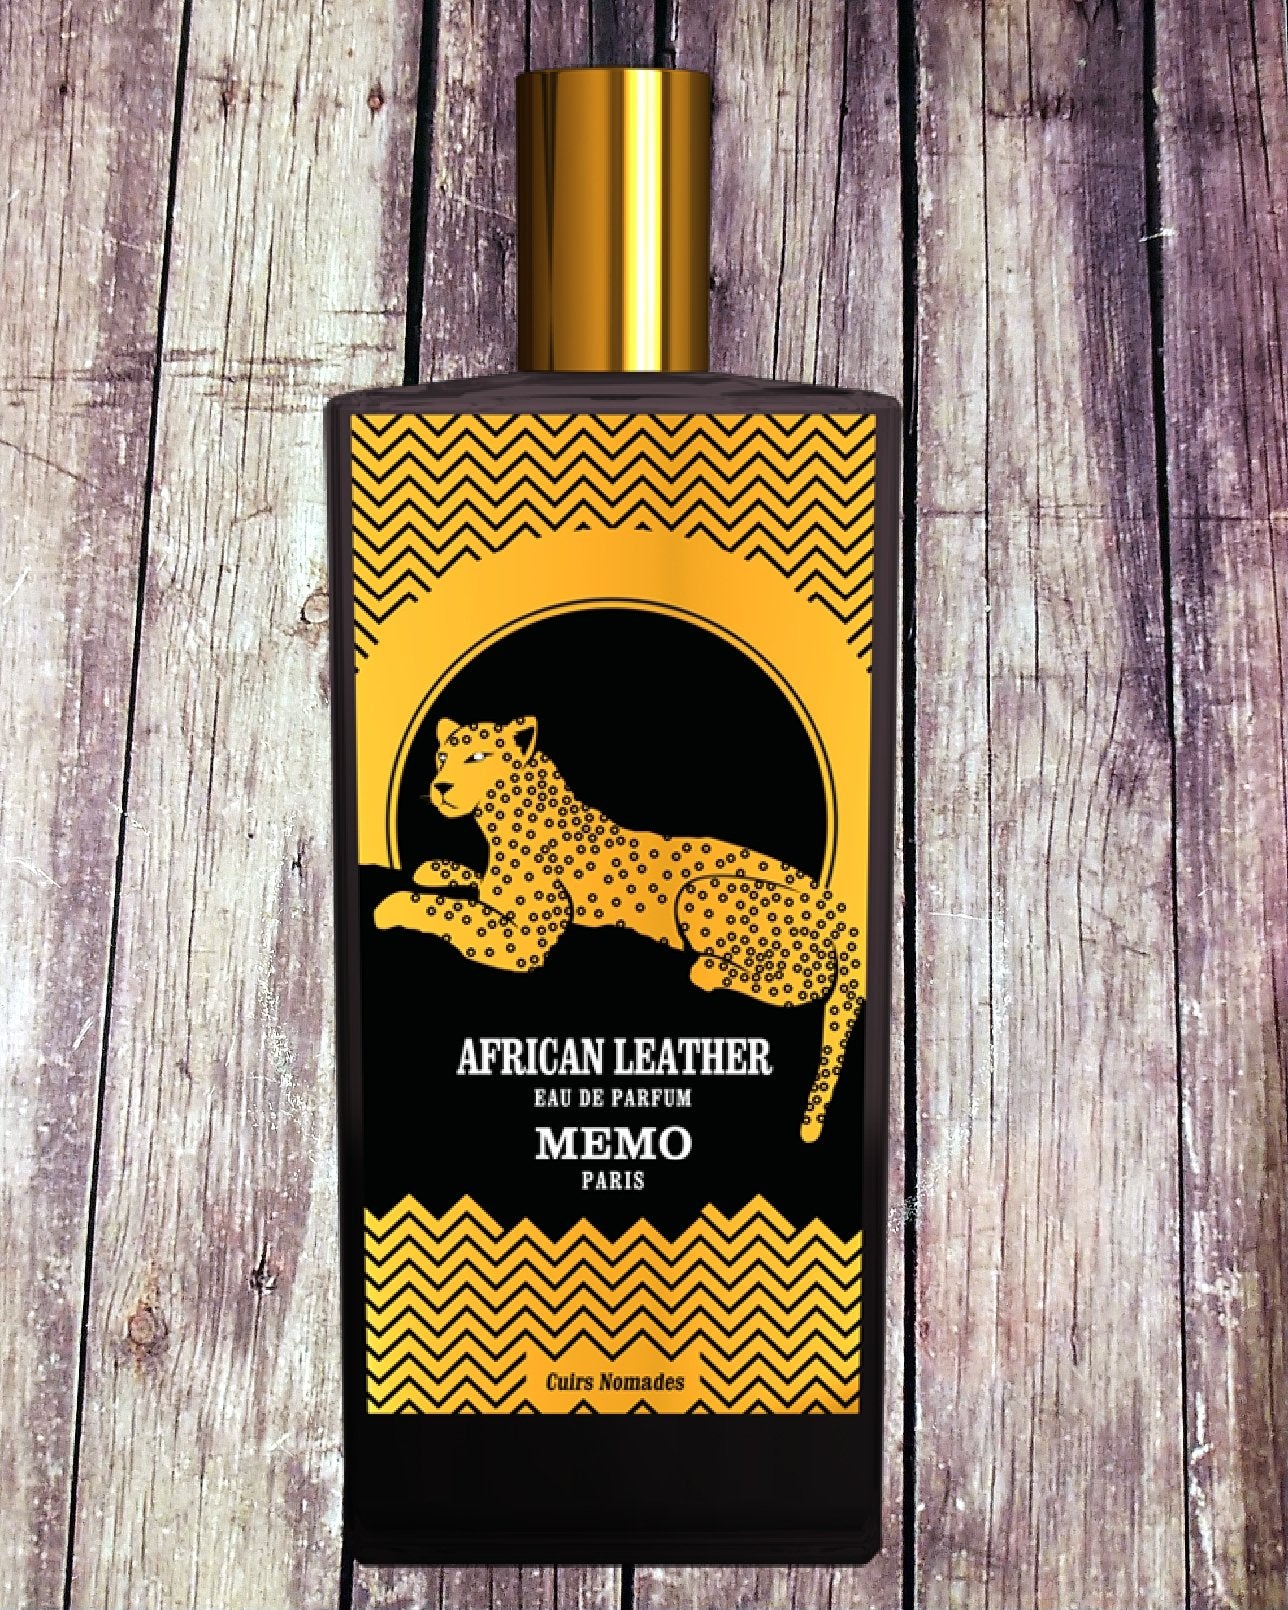 African Leather Memo Paris perfume - a fragrance for women and men